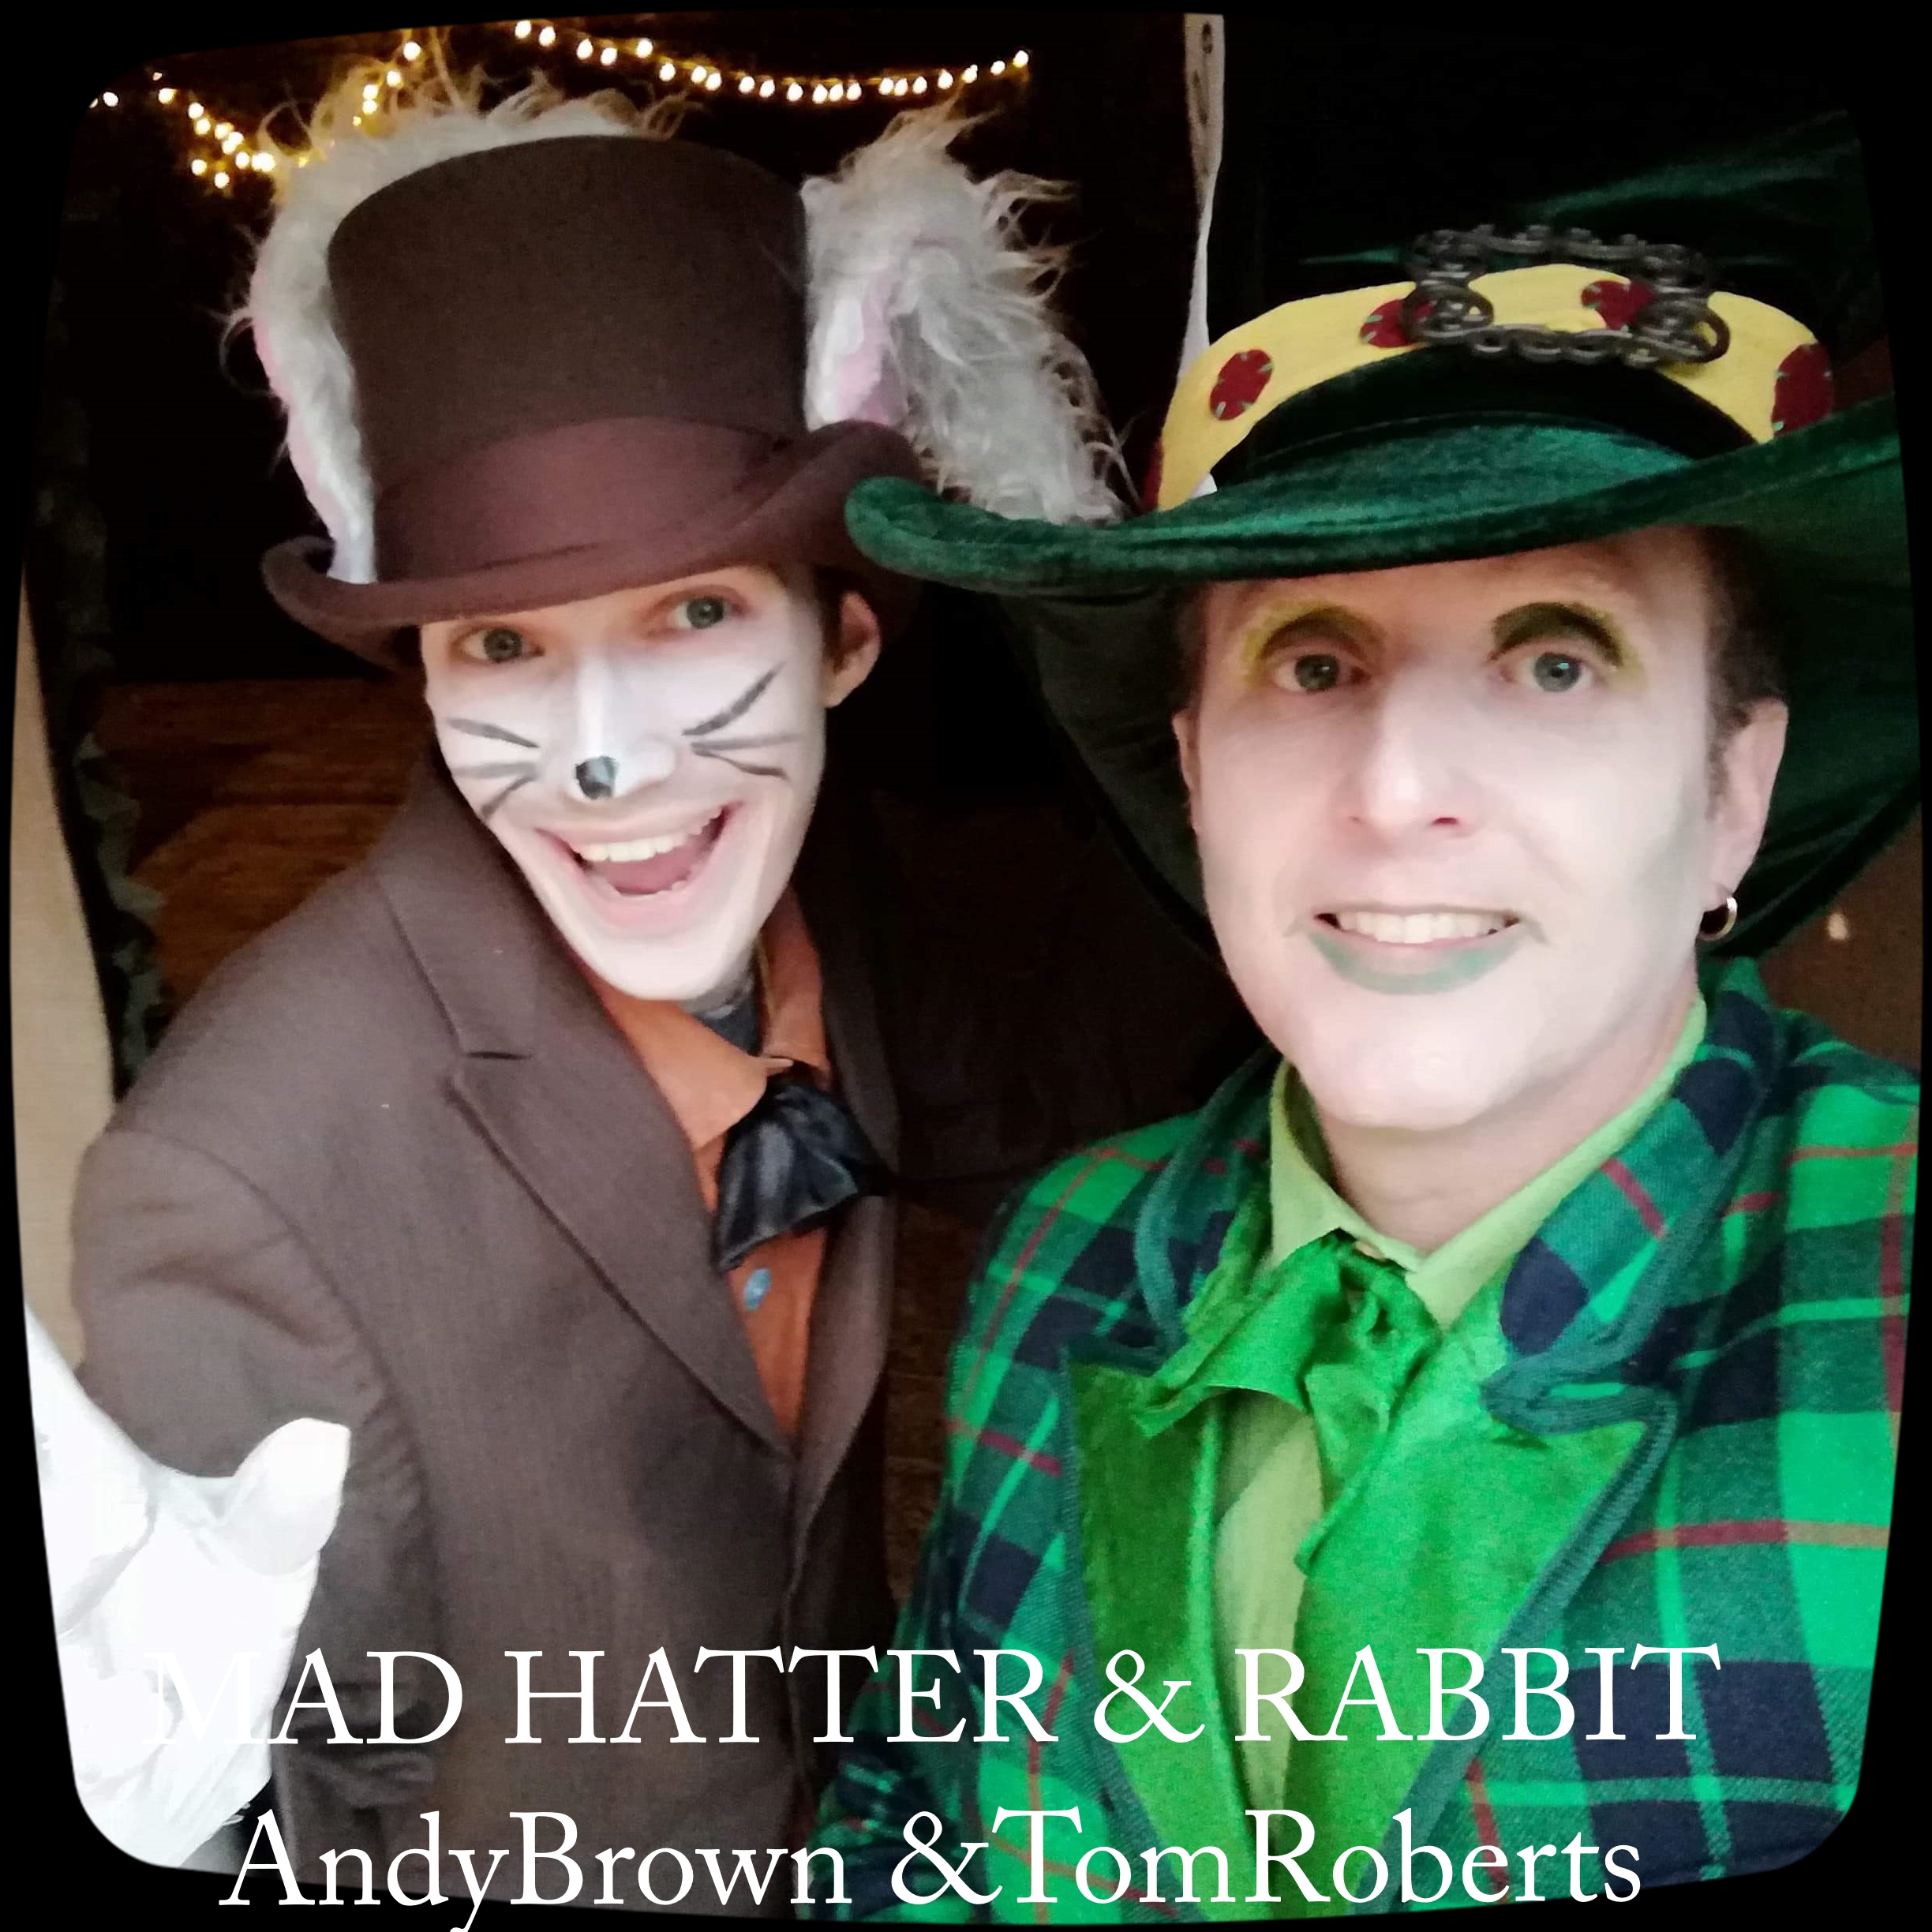 Theatre Rat presents Mad Hatter & March Hare childrens show Teesside